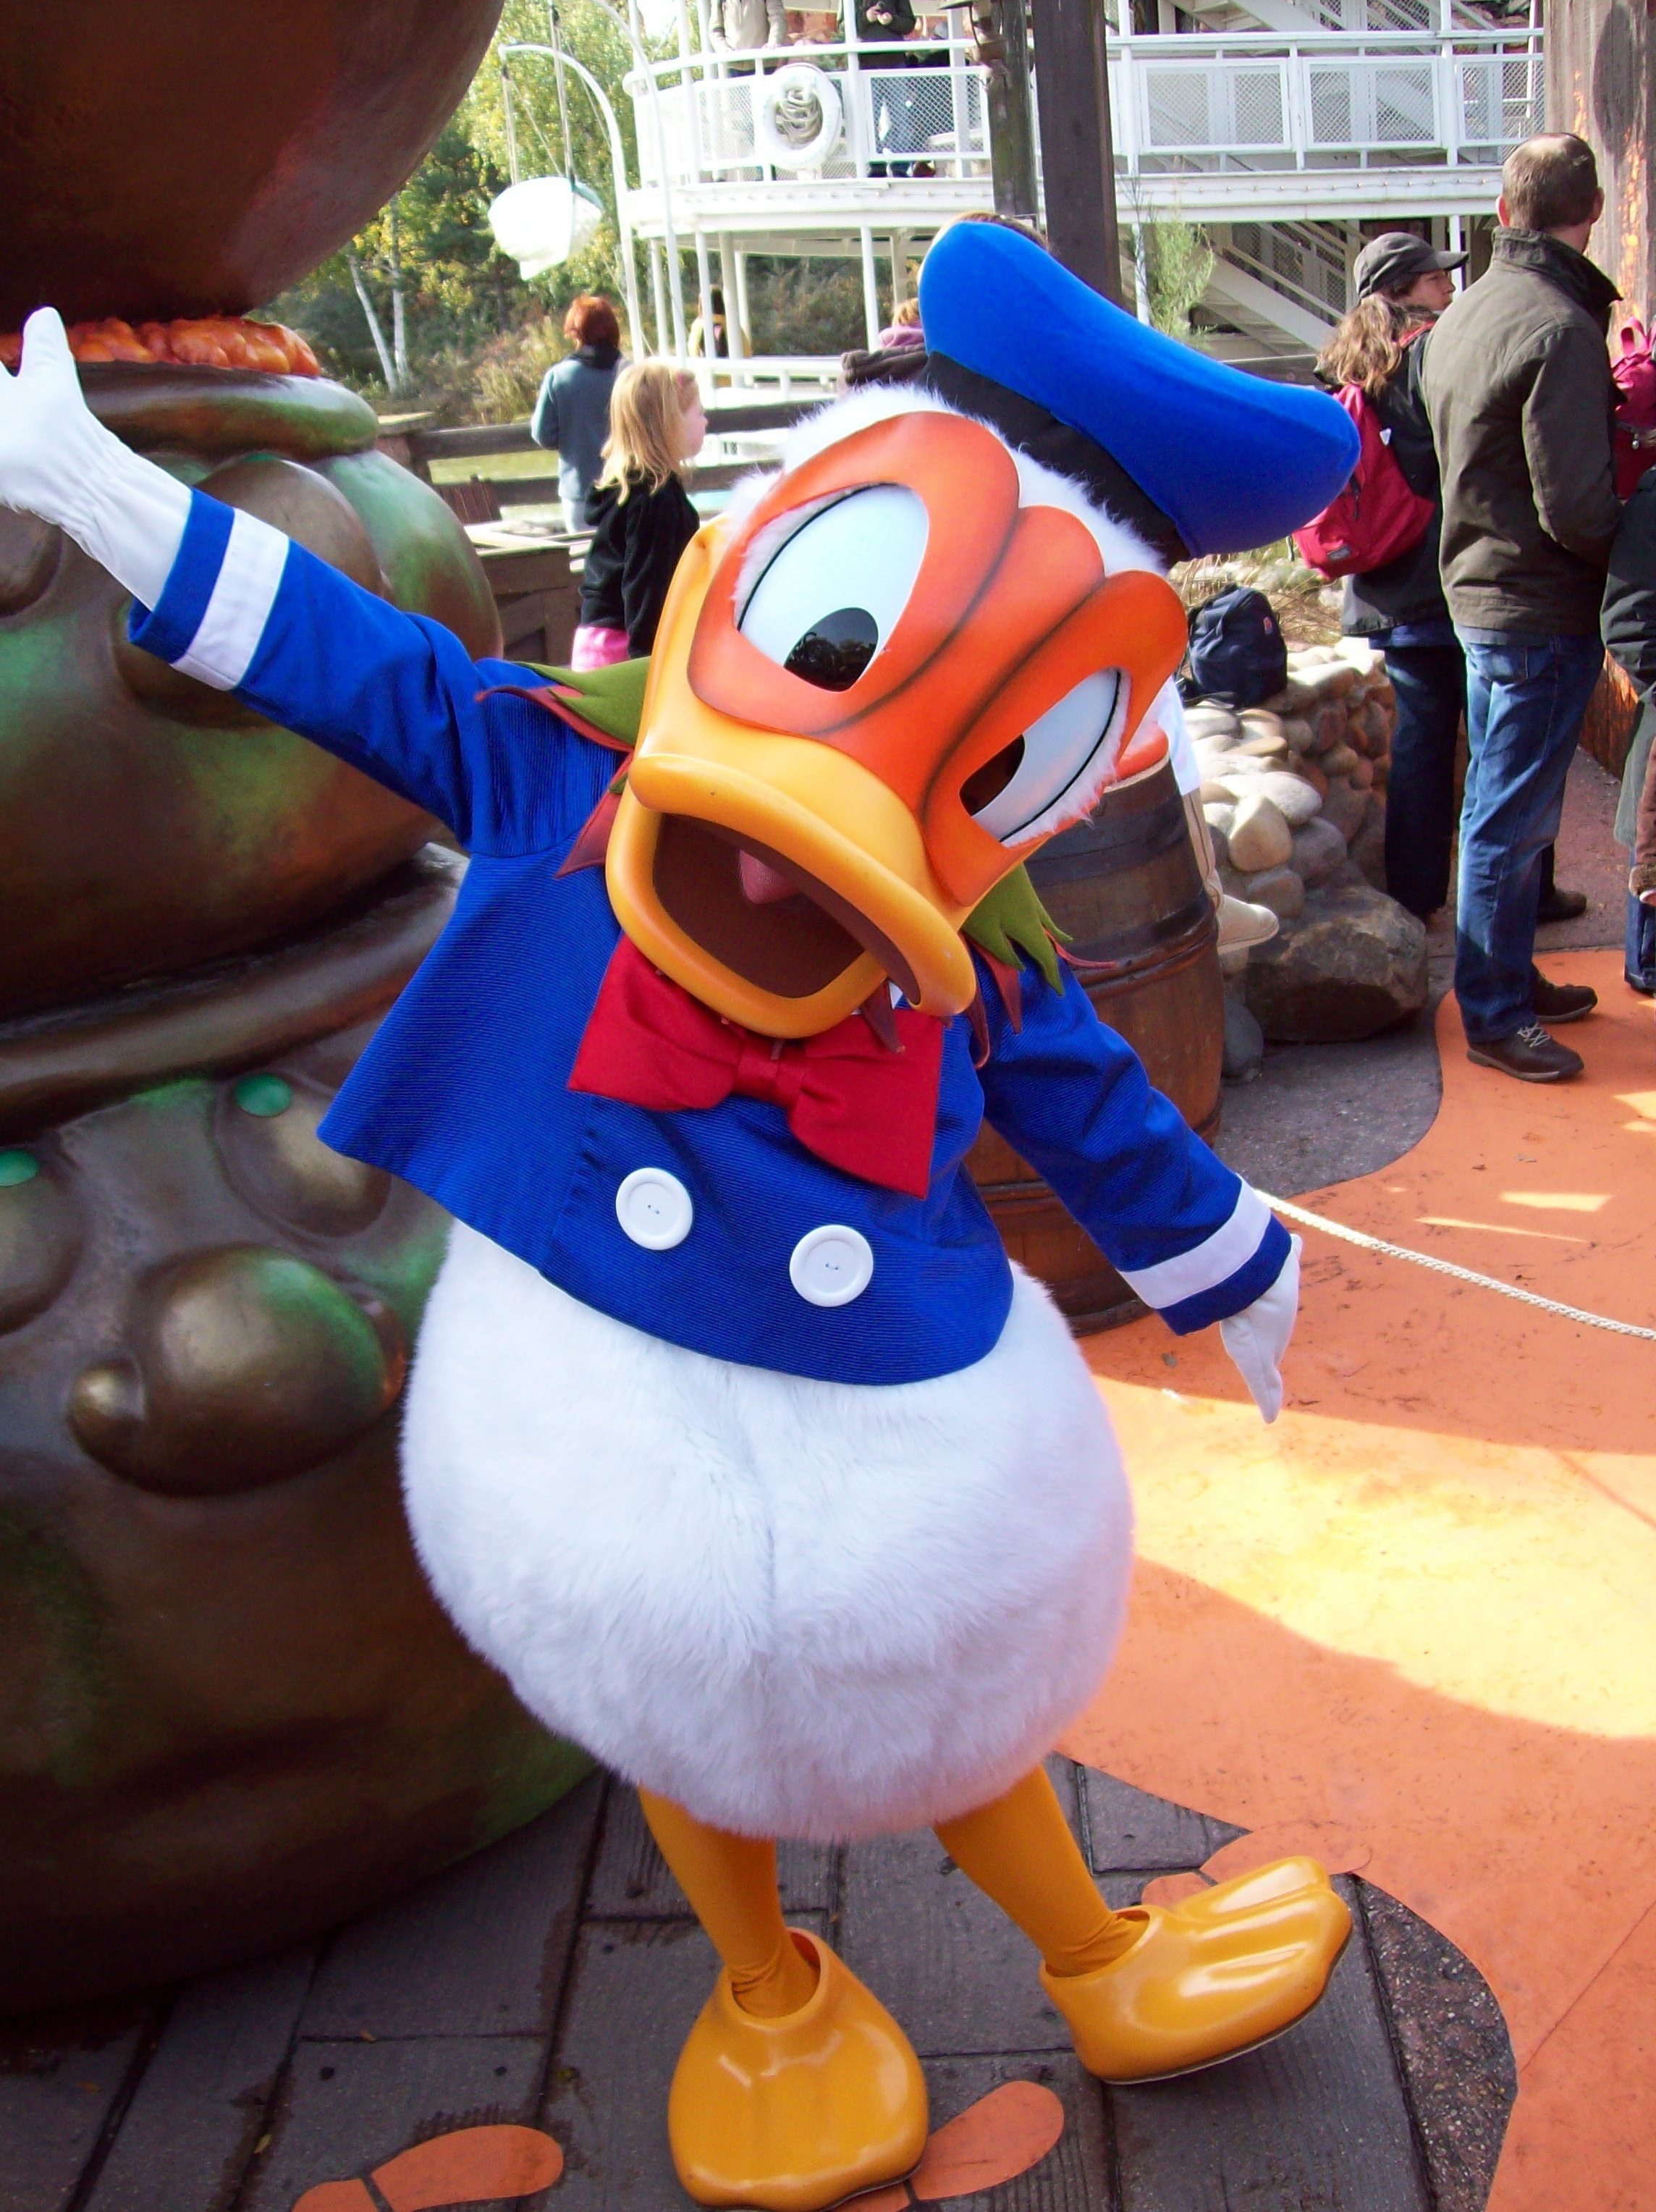 In 2008 Donald was meeting guests near Phanton Manor; he got in the Halloween mood by wearing this Halloween Pumpkin mask.